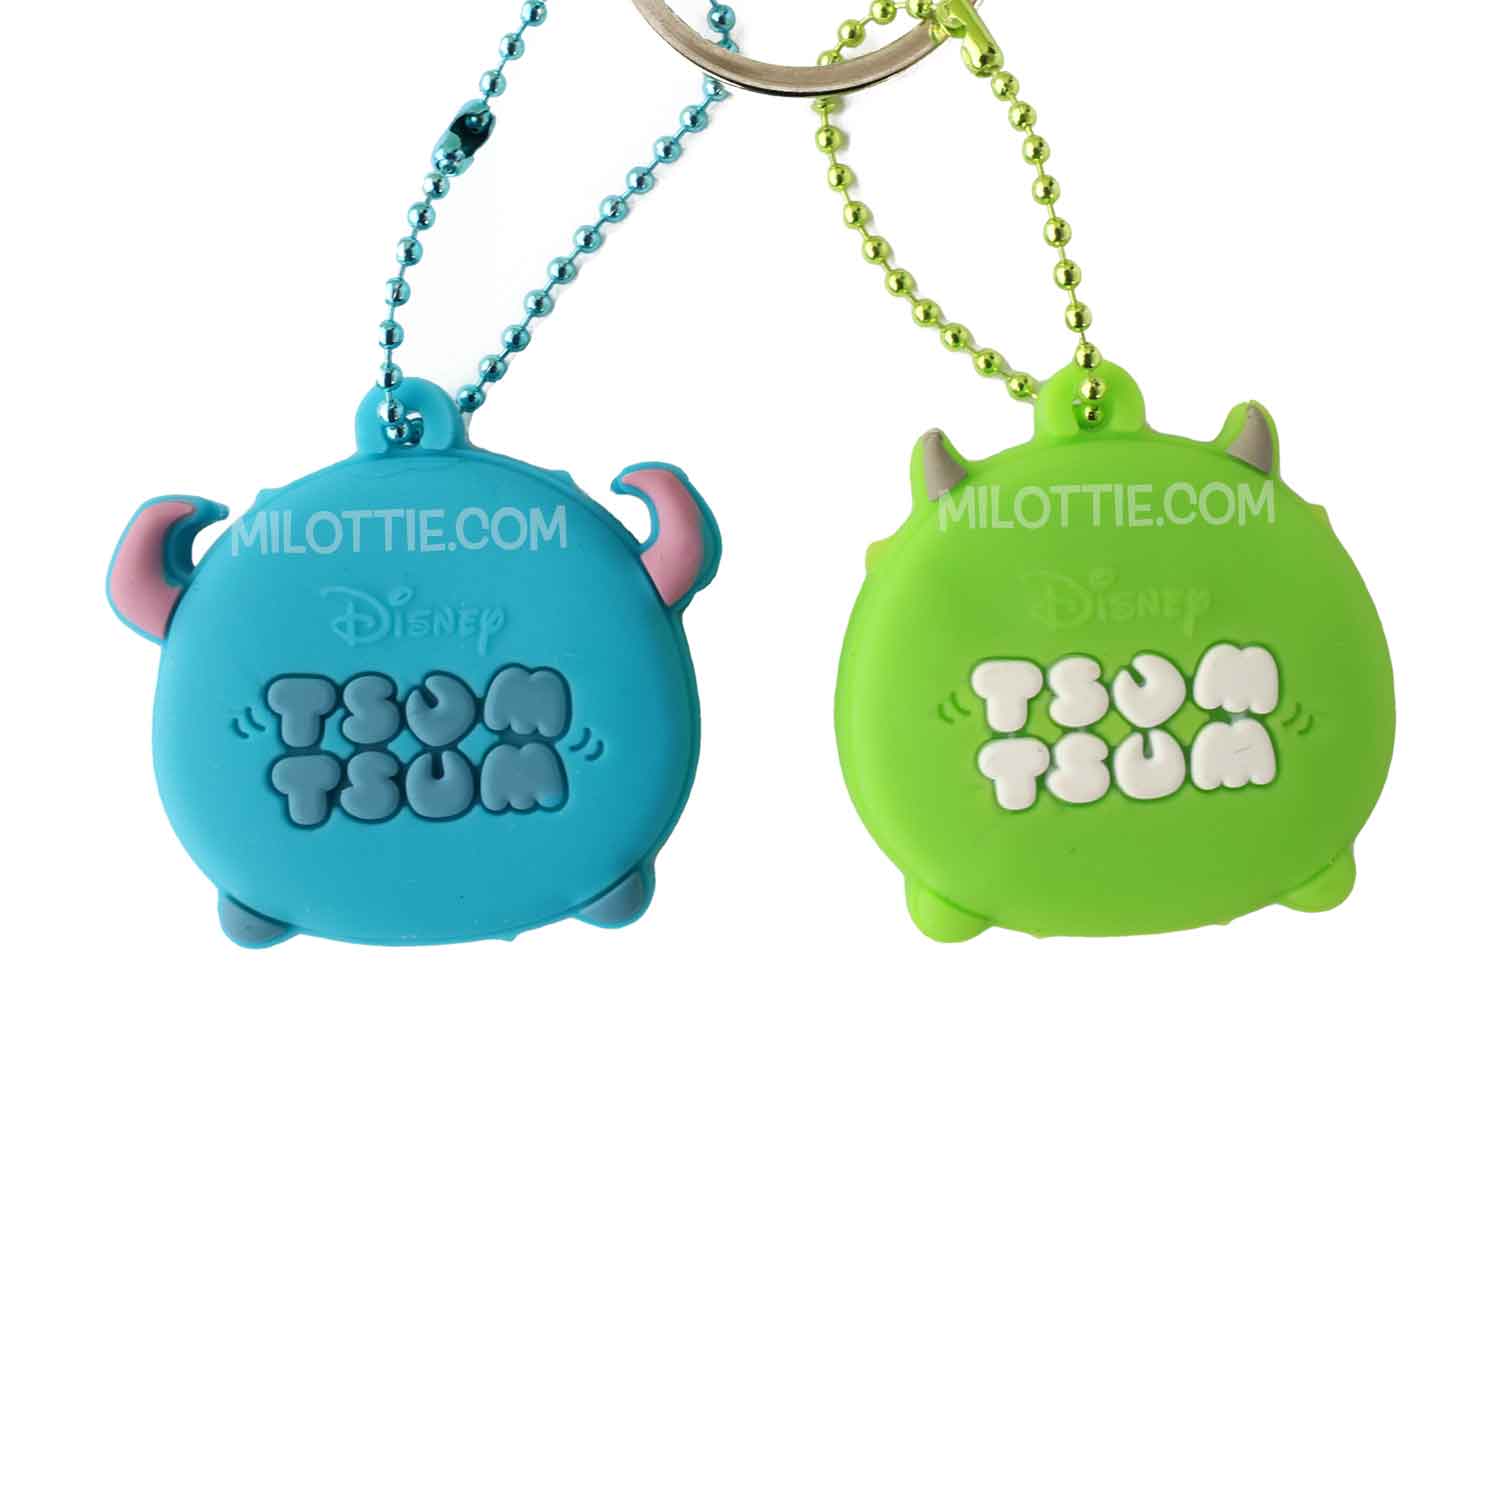 Mike and sulley key covers - Milottie